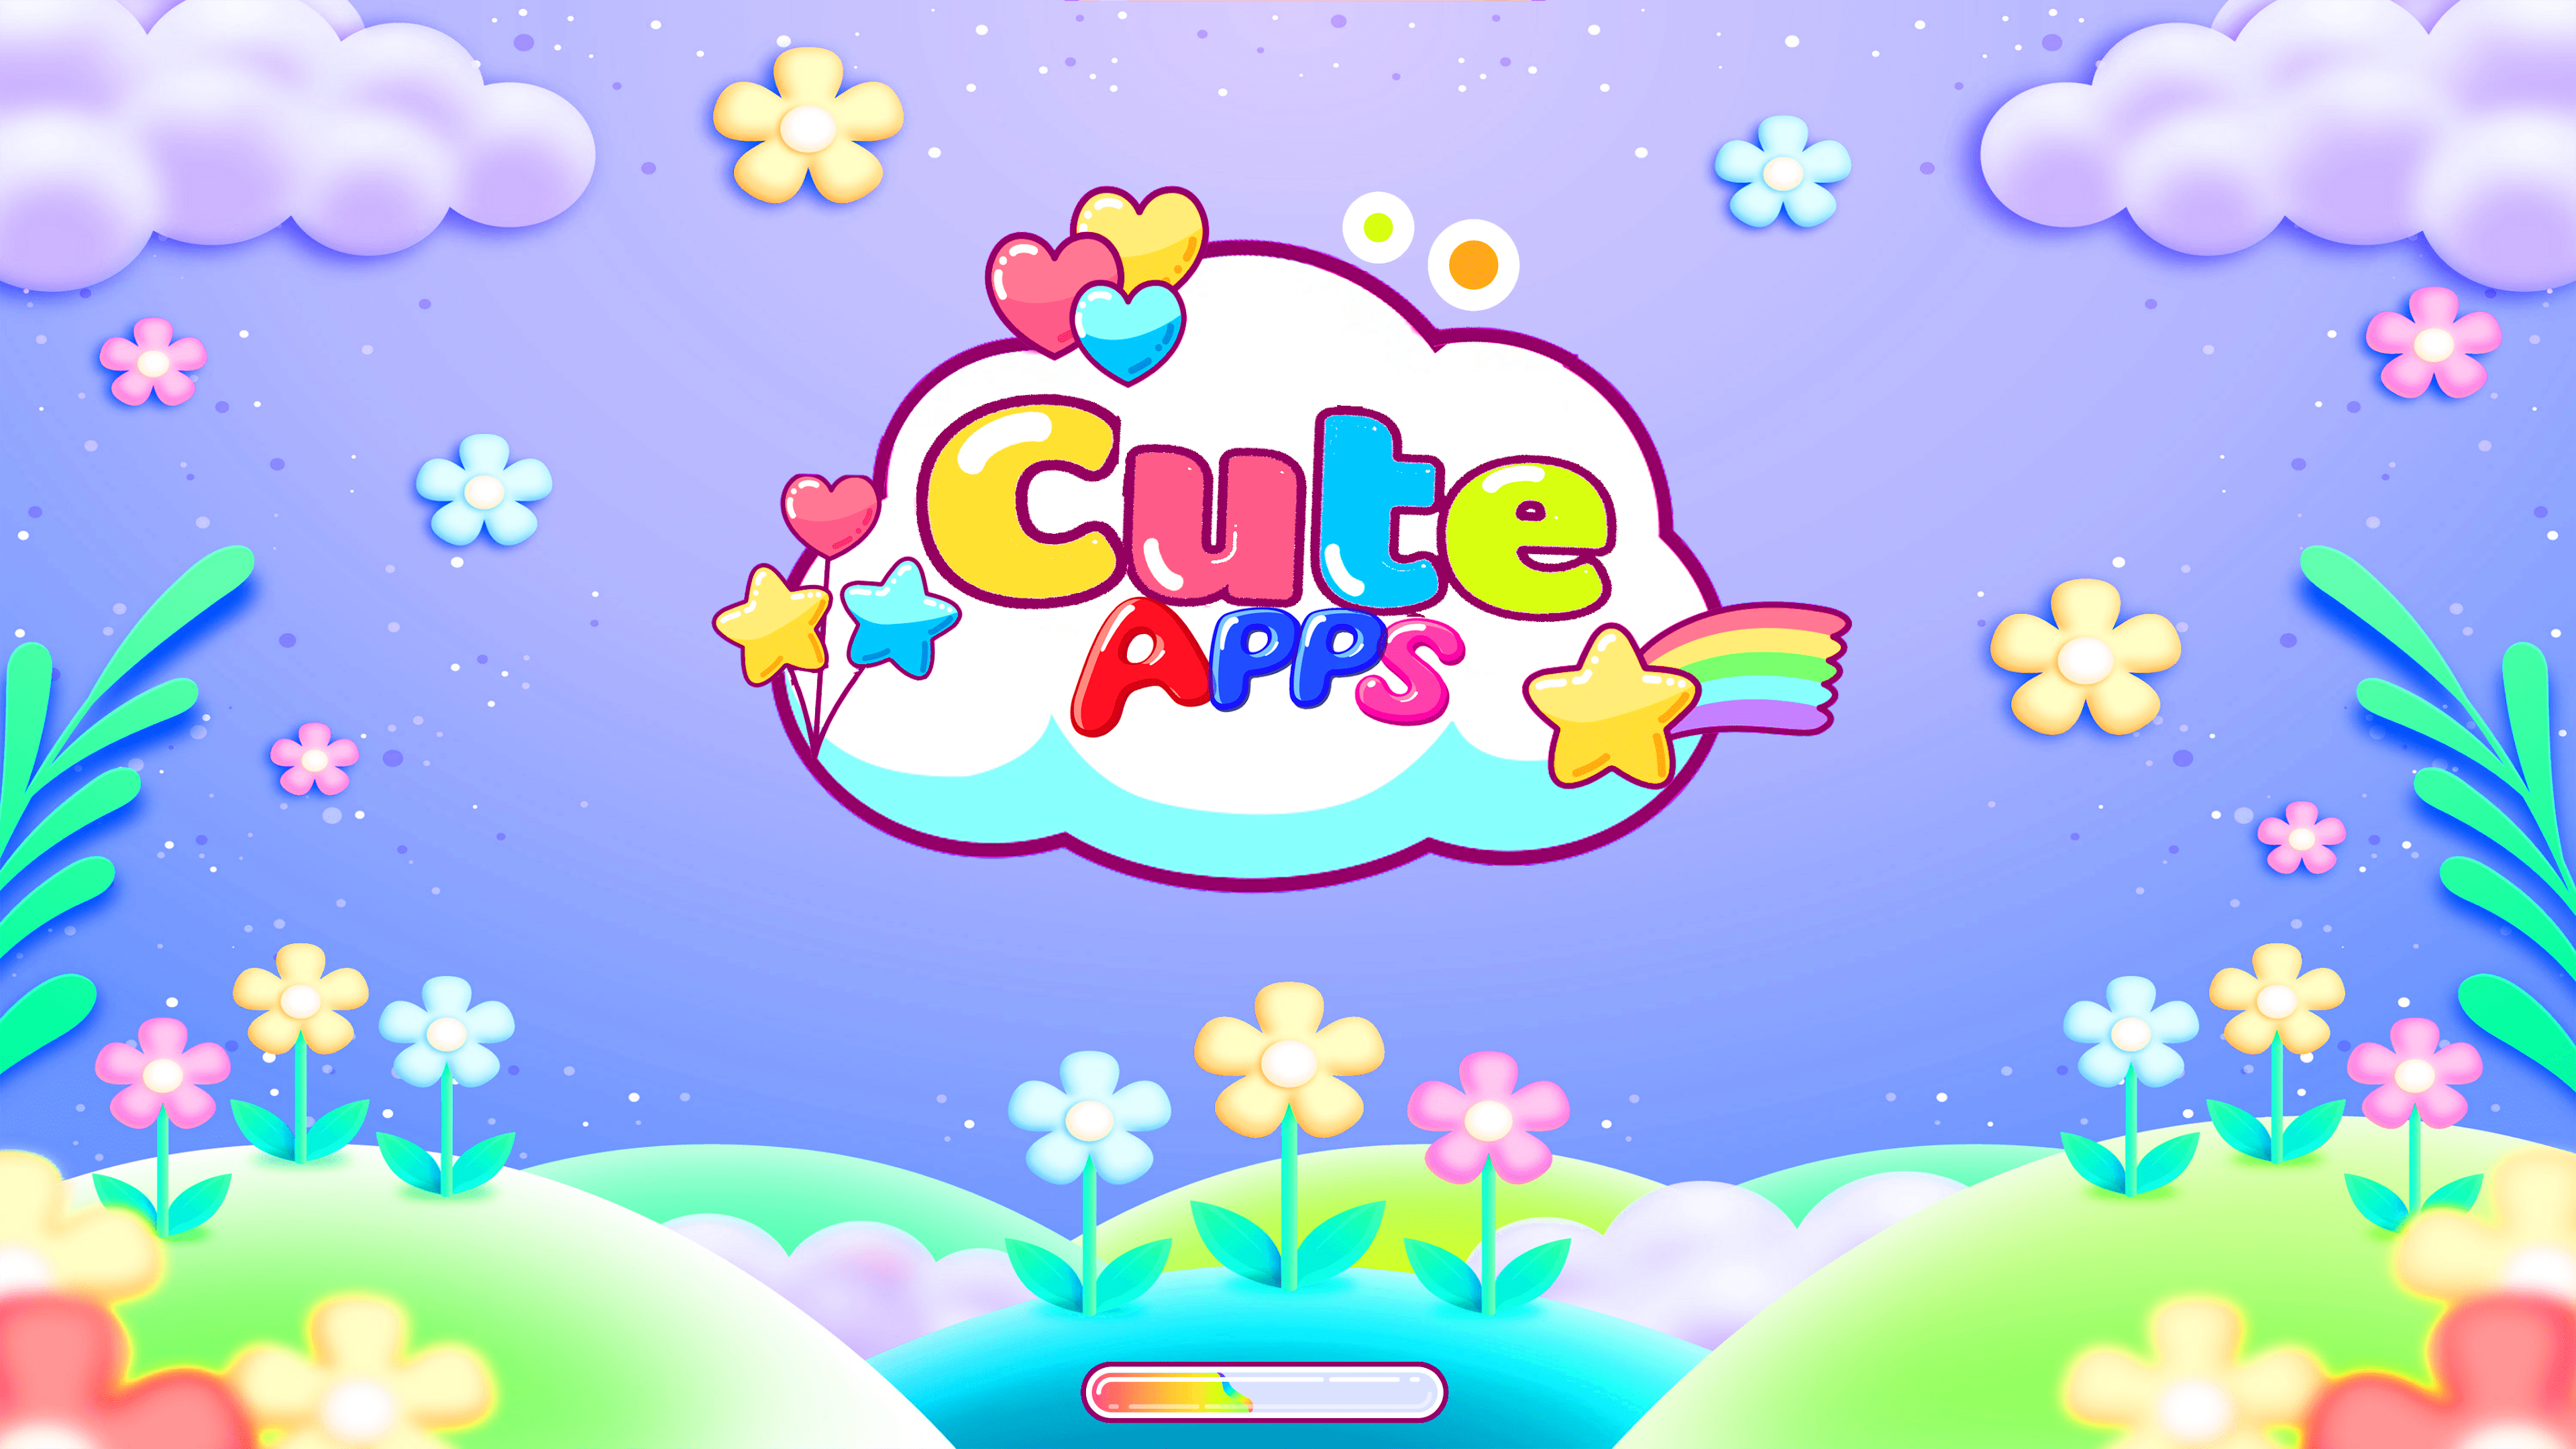 Cute & Aesthetic Games to Play When Bored (OFFLINE)